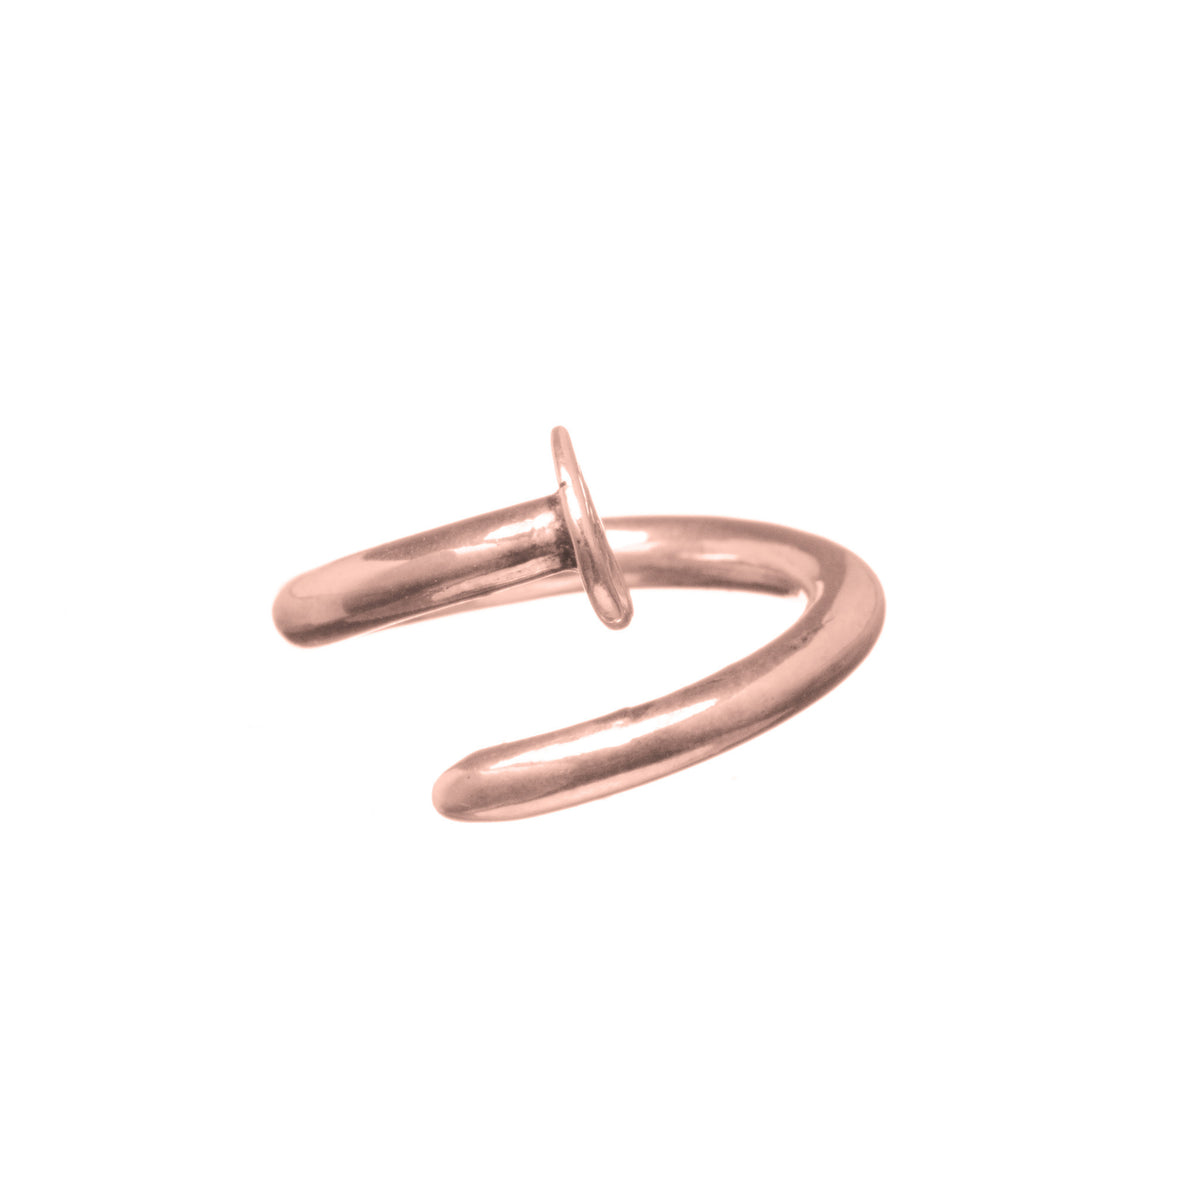 Buy Copper Band Ring Copper Ring Band, Copper Ring Men,copper Ring Women,copper  Ring for Arthritis,fulfil Copper Ring Benefits for Man & Women Online in  India - Etsy